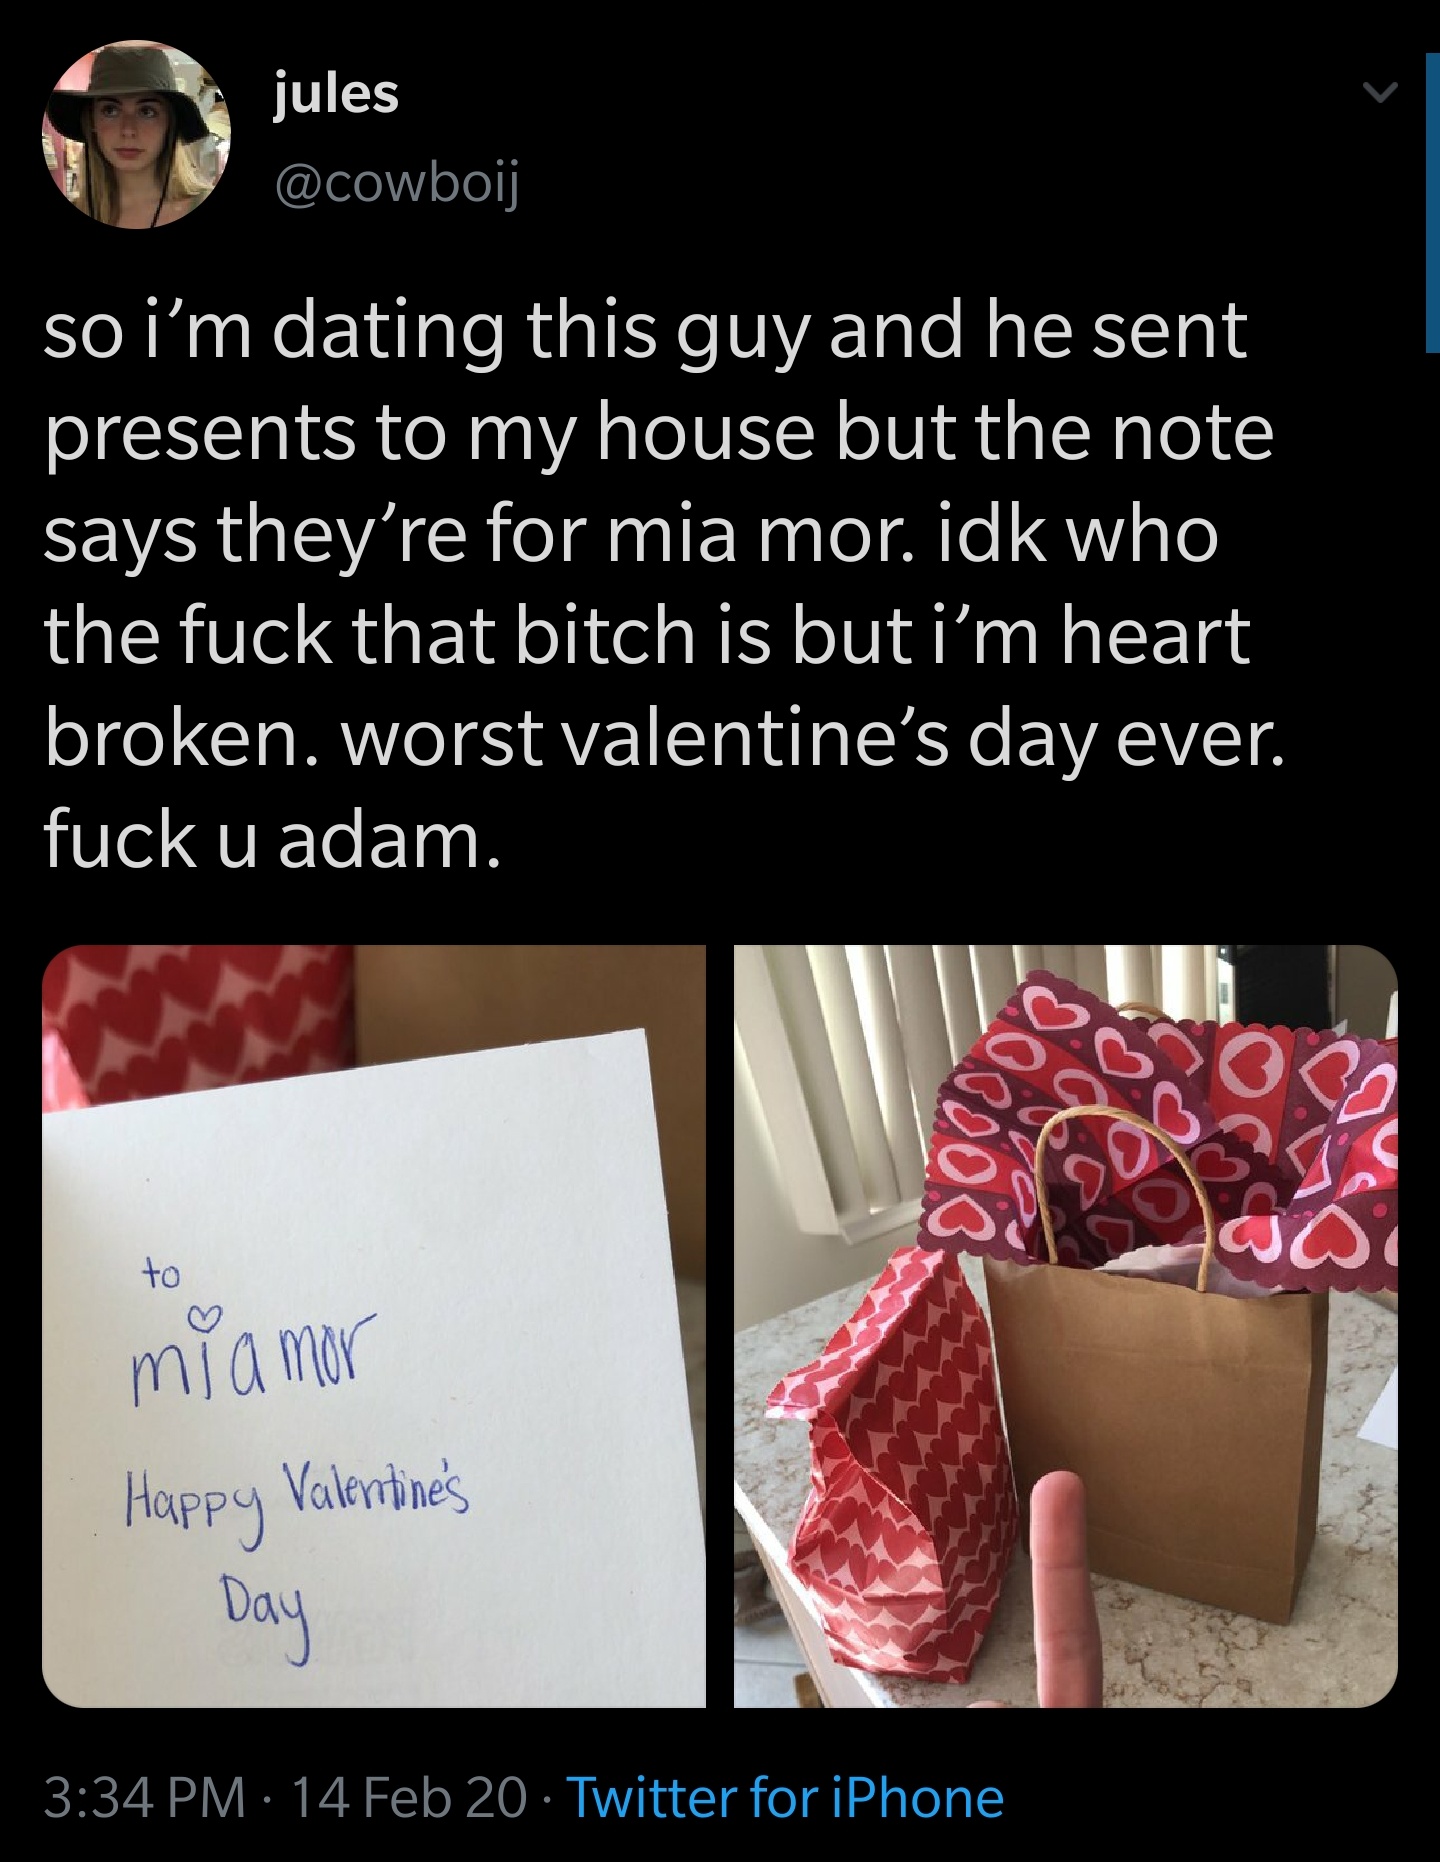 adele someone like you lyrics - jules so i'm dating this guy and he sent presents to my house but the note says they're for mia mor. idk who the fuck that bitch is but i'm heart broken. worst valentine's day ever. fuck u adam. 90000 mi amor Happy Valentin